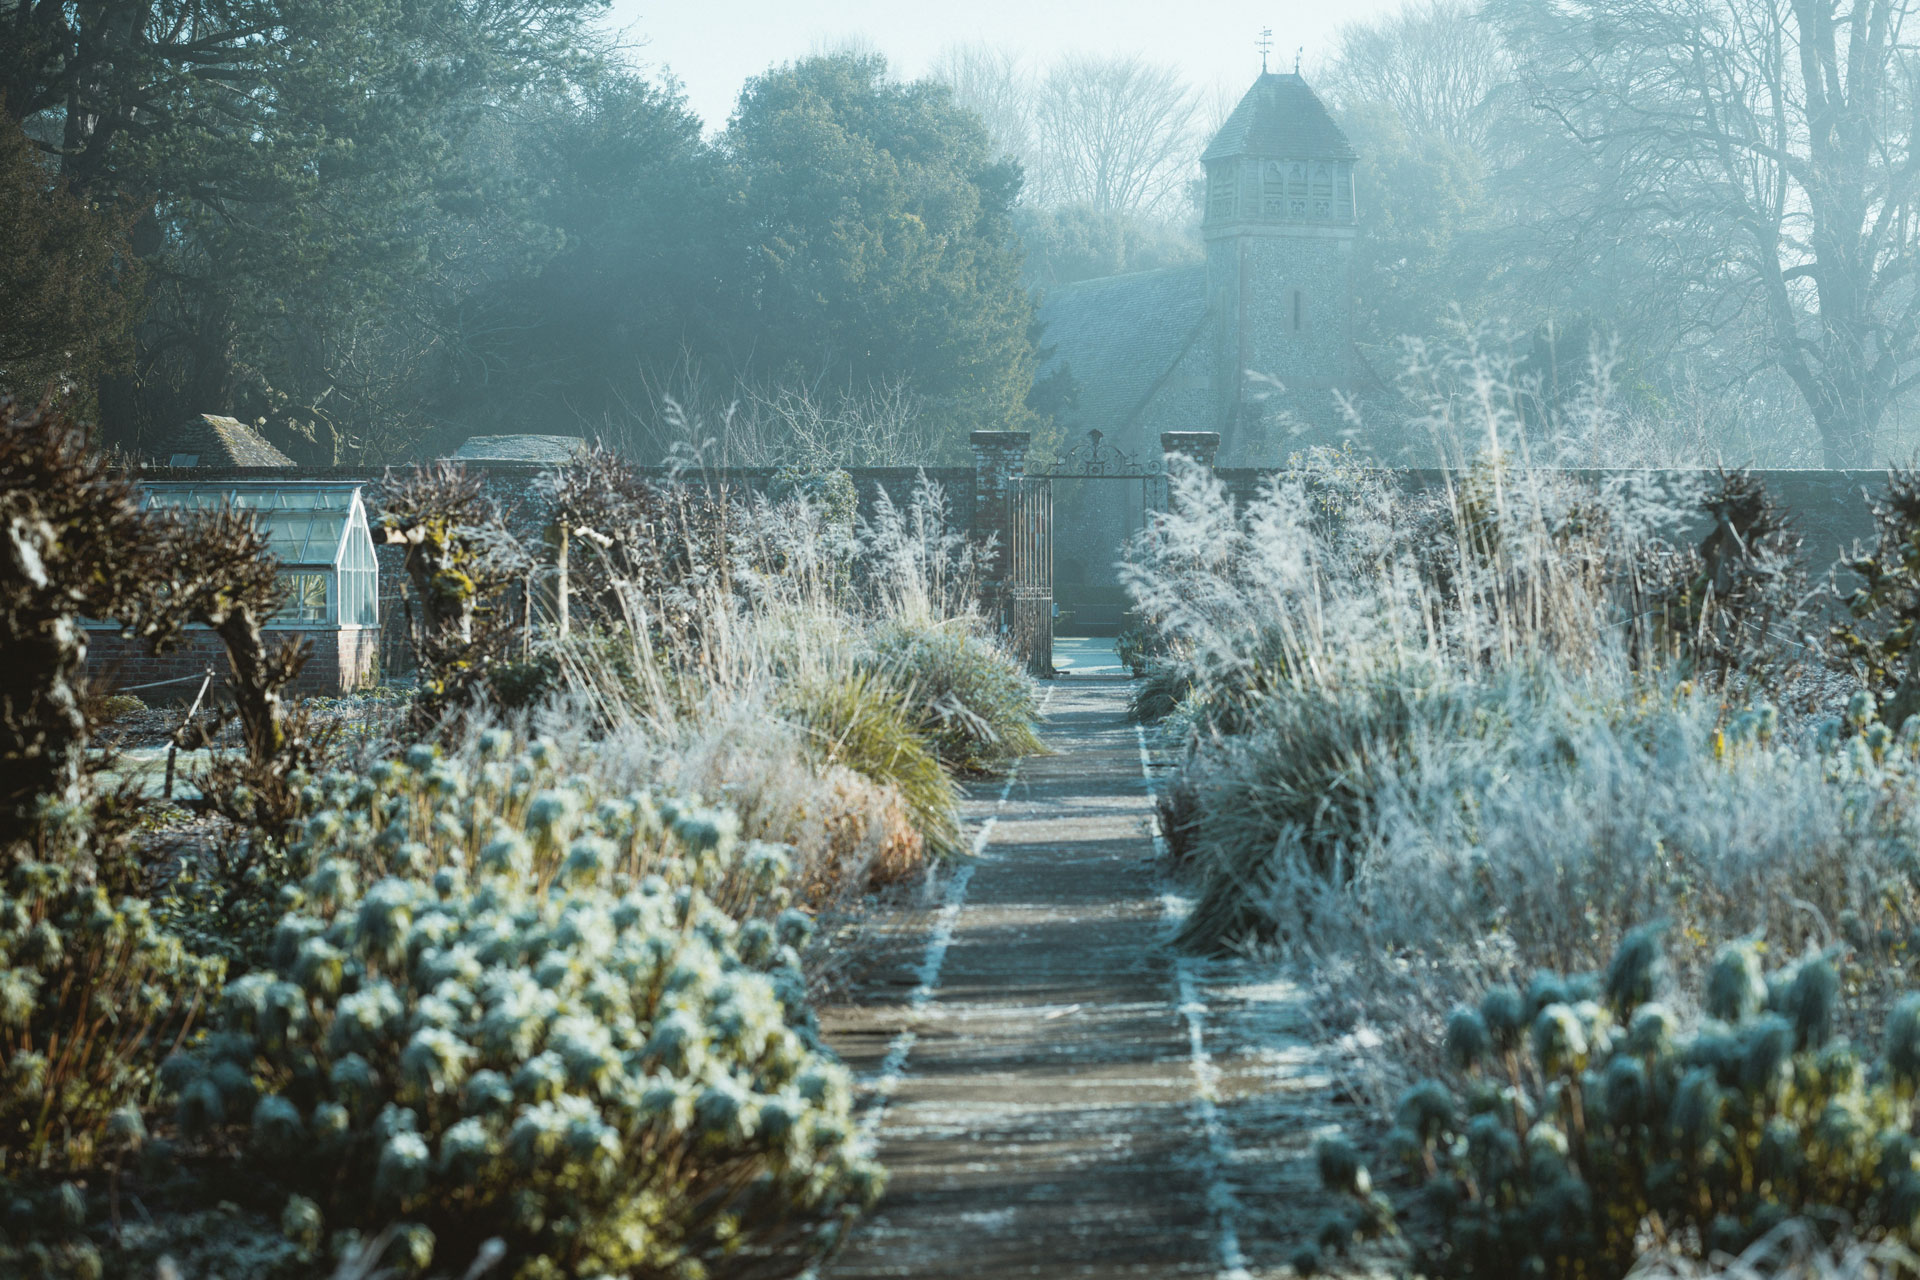 Three Experts Tell Us What To Do With Our Gardens In Winter